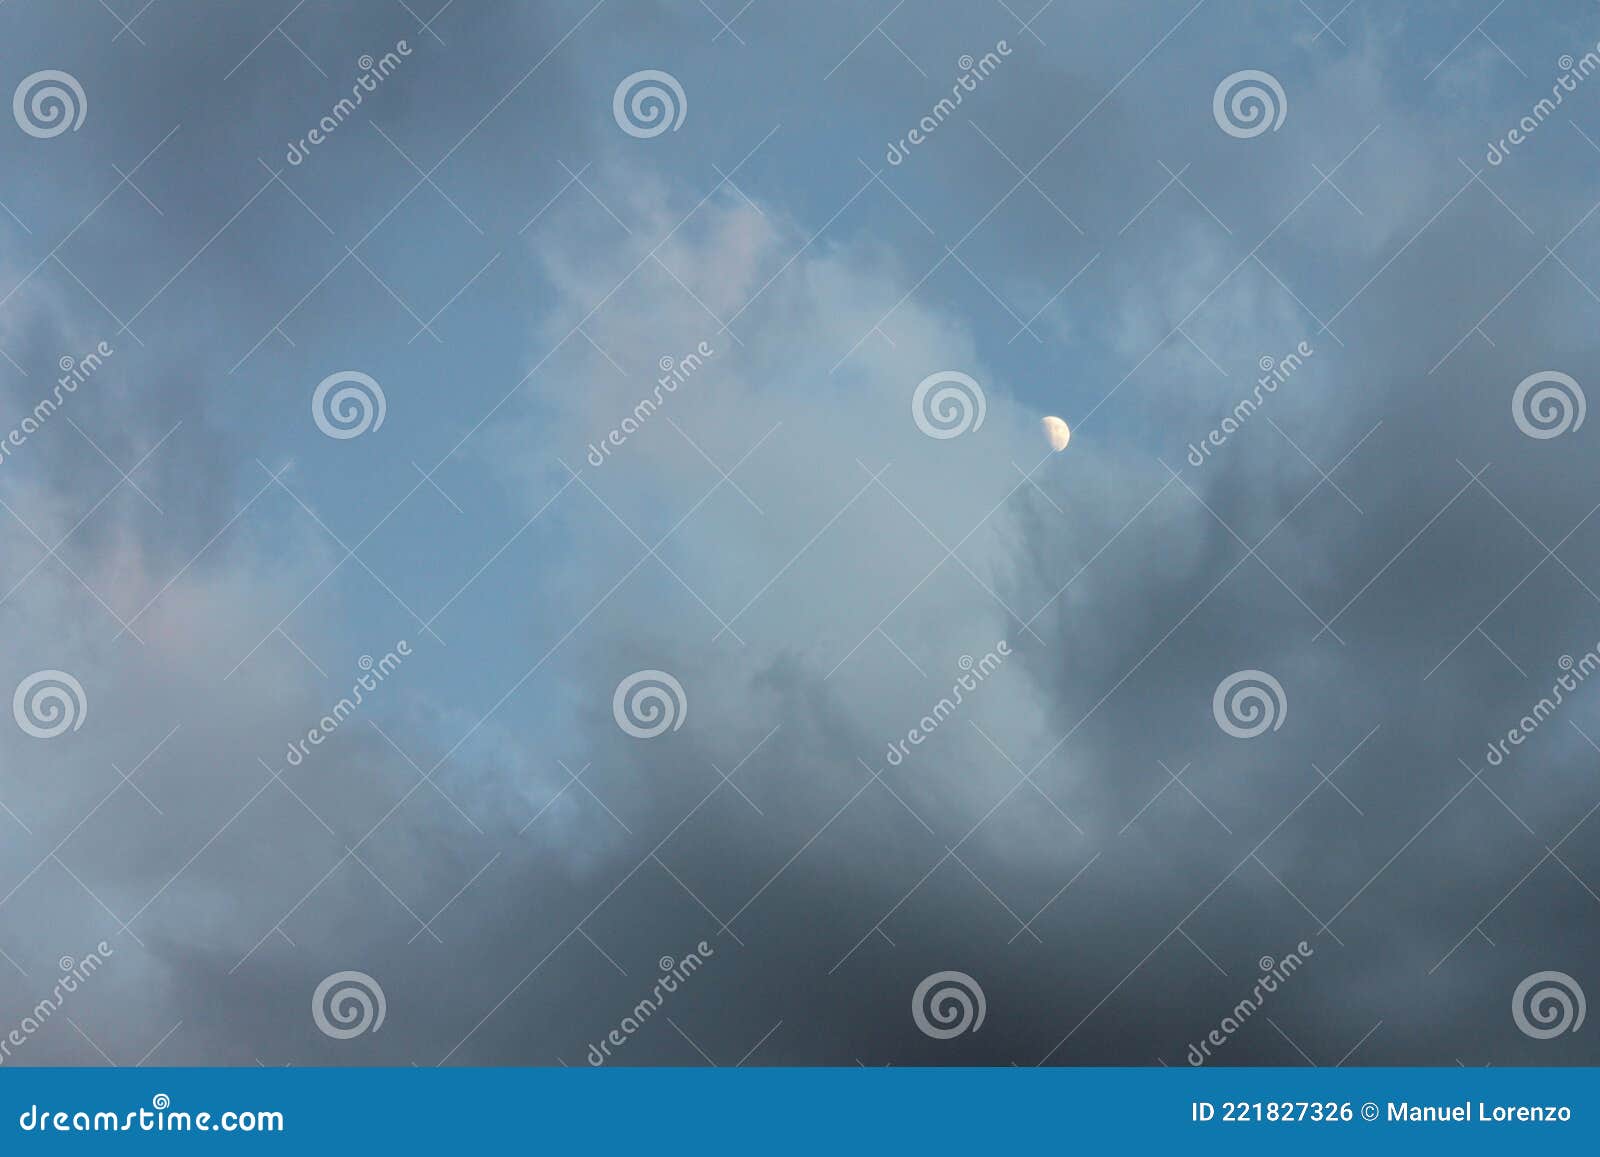 beautiful clouds with moon gray storm darkness rain